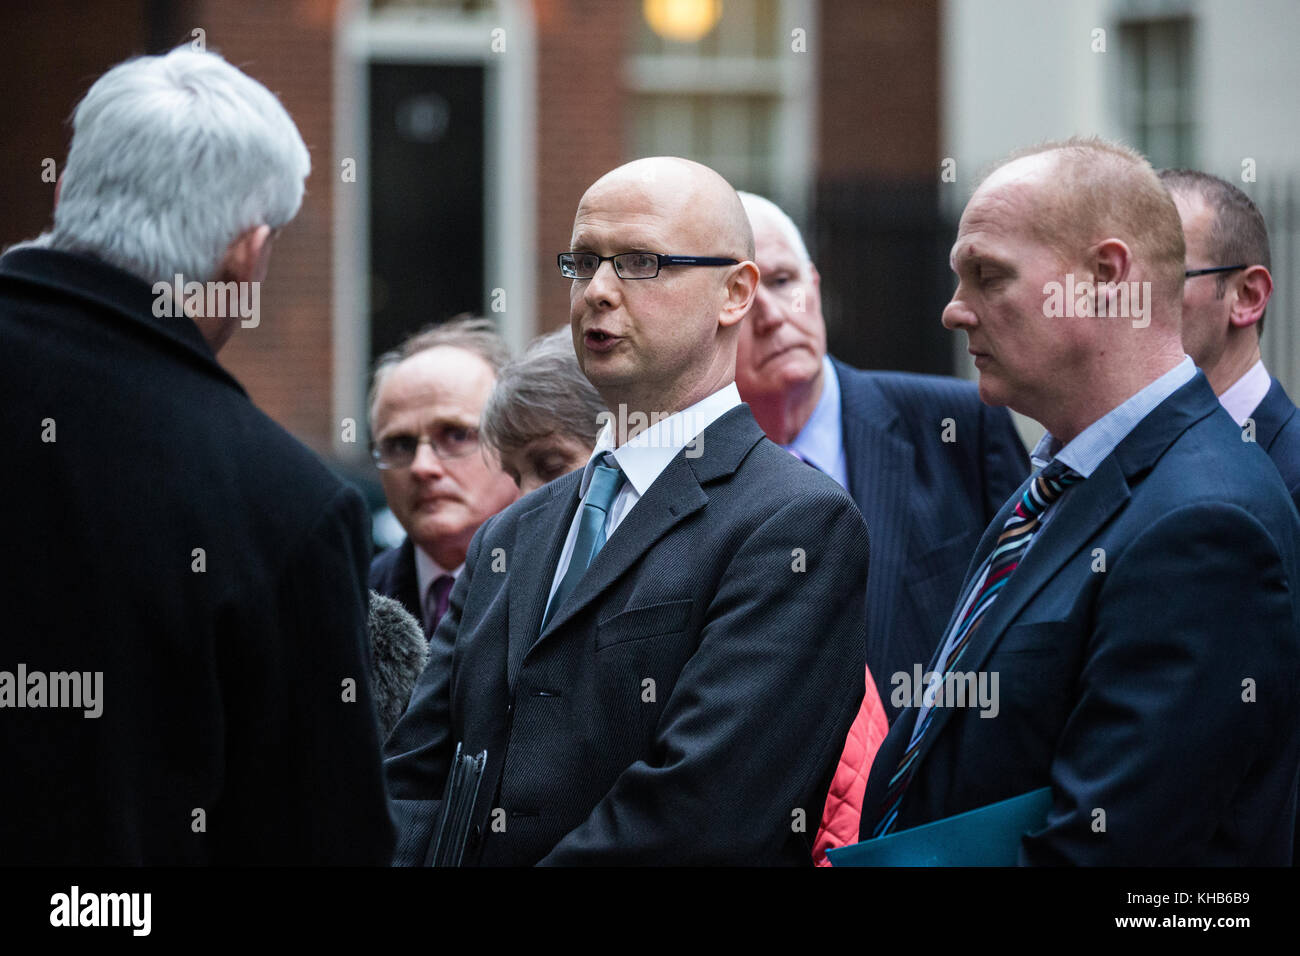 London, UK. 14th Nov, 2017. A delegation including Sinn Fein MPs Barry McElduff and Francie Molloy is interviewed by the media in Downing Street having presented a petition regarding the 1974 killing of Patsy Kelly, 33, a member of Omagh District Council, and having met James Brokenshire, Secretary of State for Northern Ireland. The Police Ombudsman is still investigating the death of the father-of-five after the original RUC investigation was heavily criticised. No one has ever been charged regarding his killing. Credit: Mark Kerrison/Alamy Live News Stock Photo